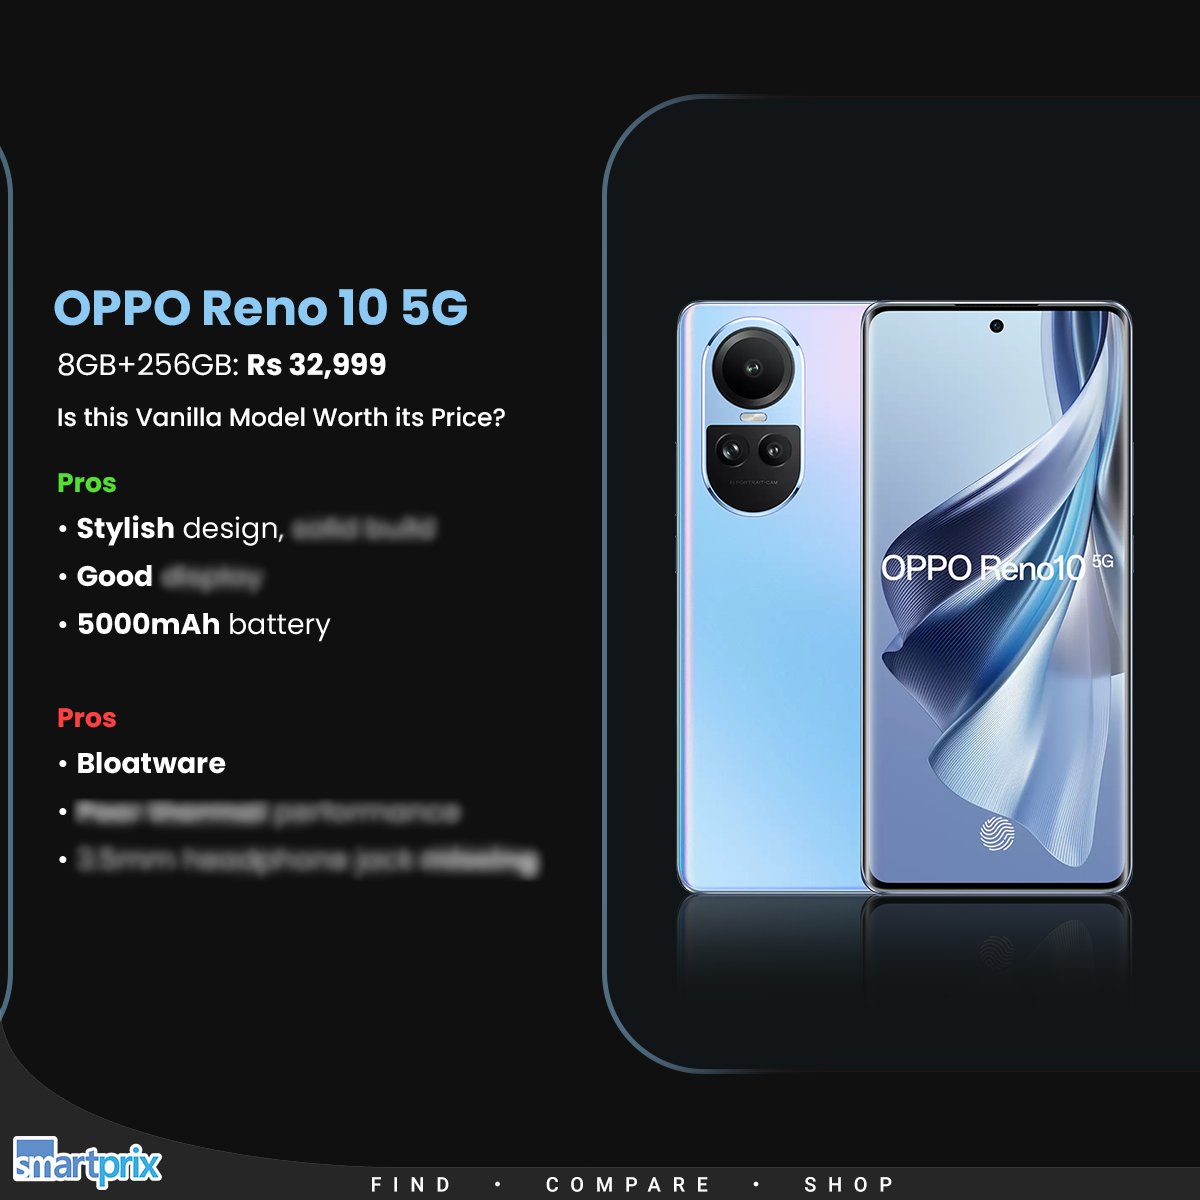 OPPO Reno 10 Pro Review with Pros and Cons - Smartprix